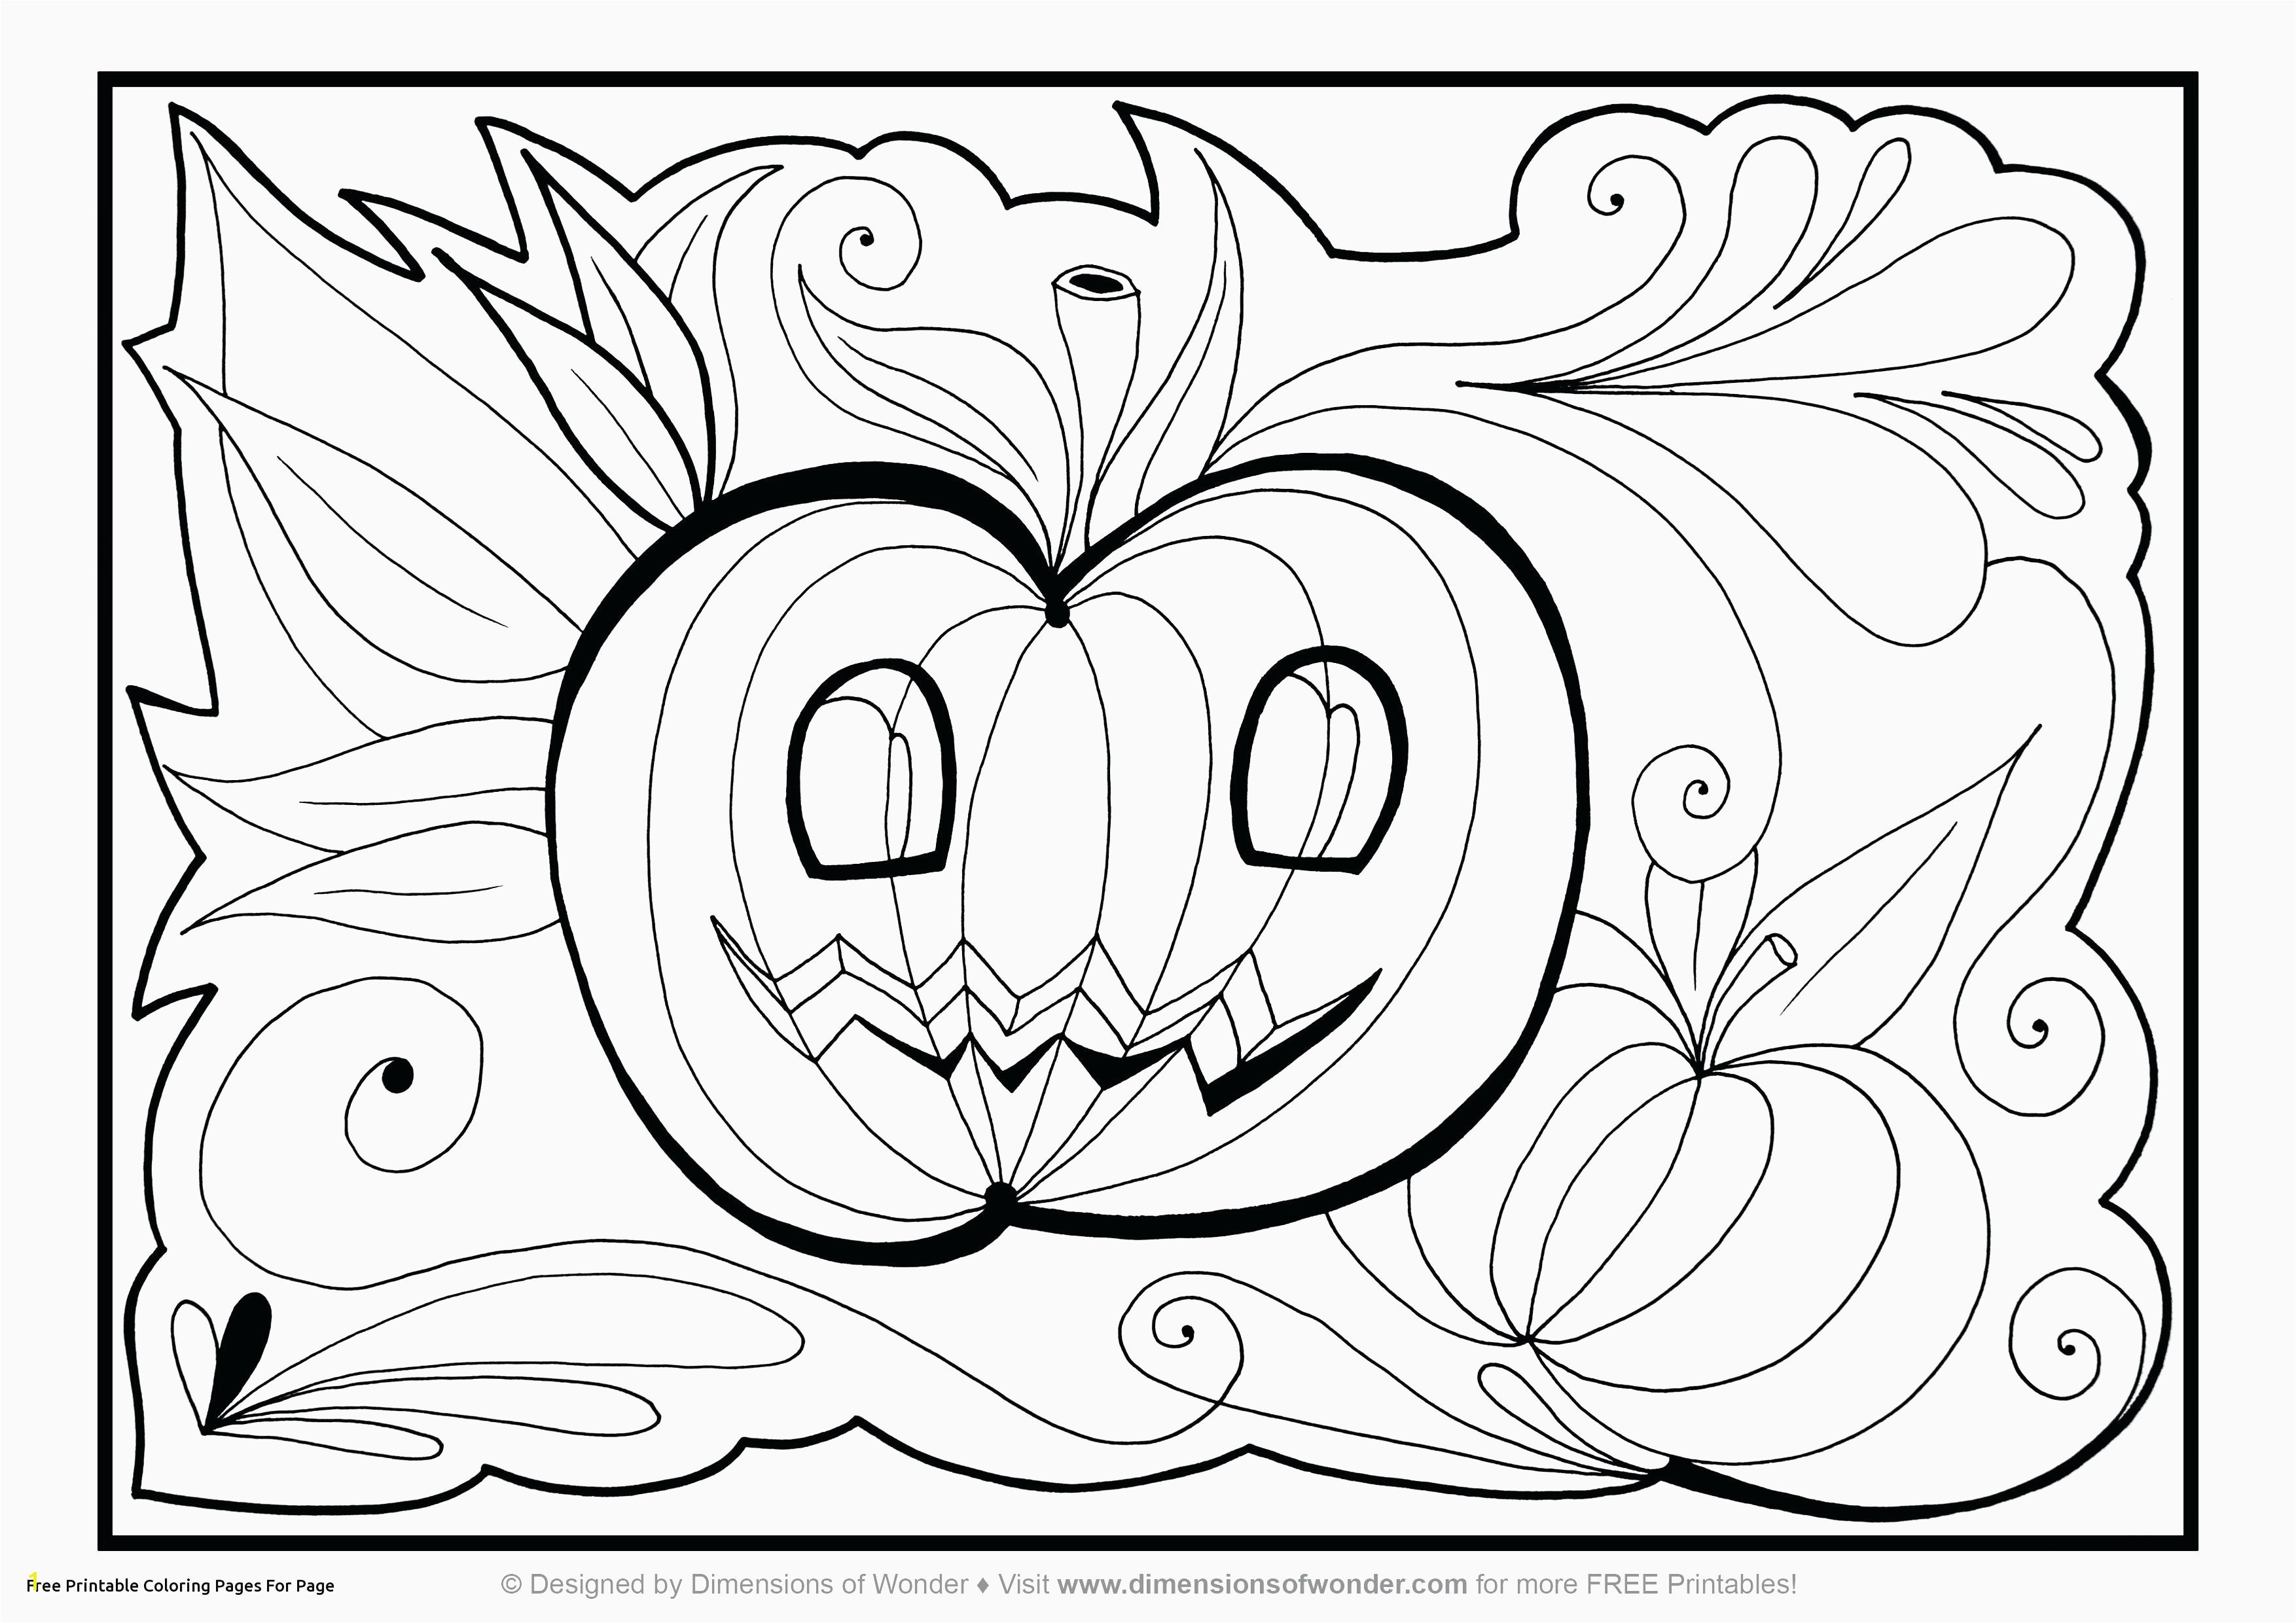 Pumpkin Coloring Pages Pdf Halloween Coloring Pages Printable Coloring Chrsistmas